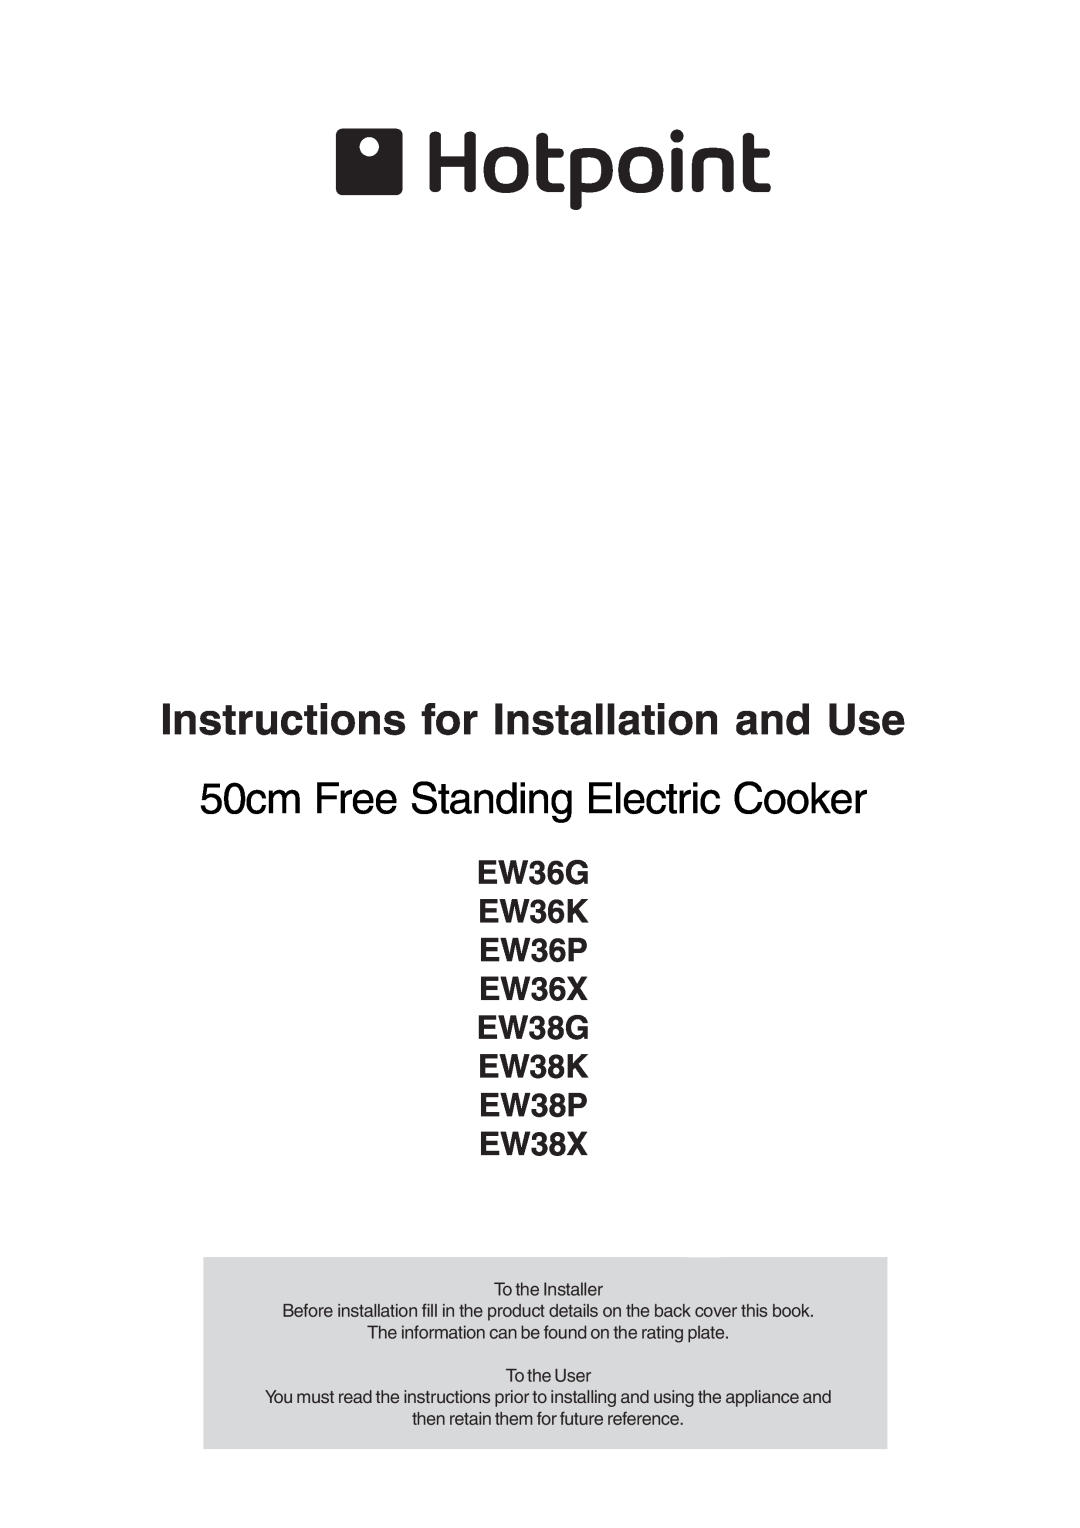 Hotpoint EW36G manual Instructions for Installation and Use, 50cm Free Standing Electric Cooker, To the Installer 